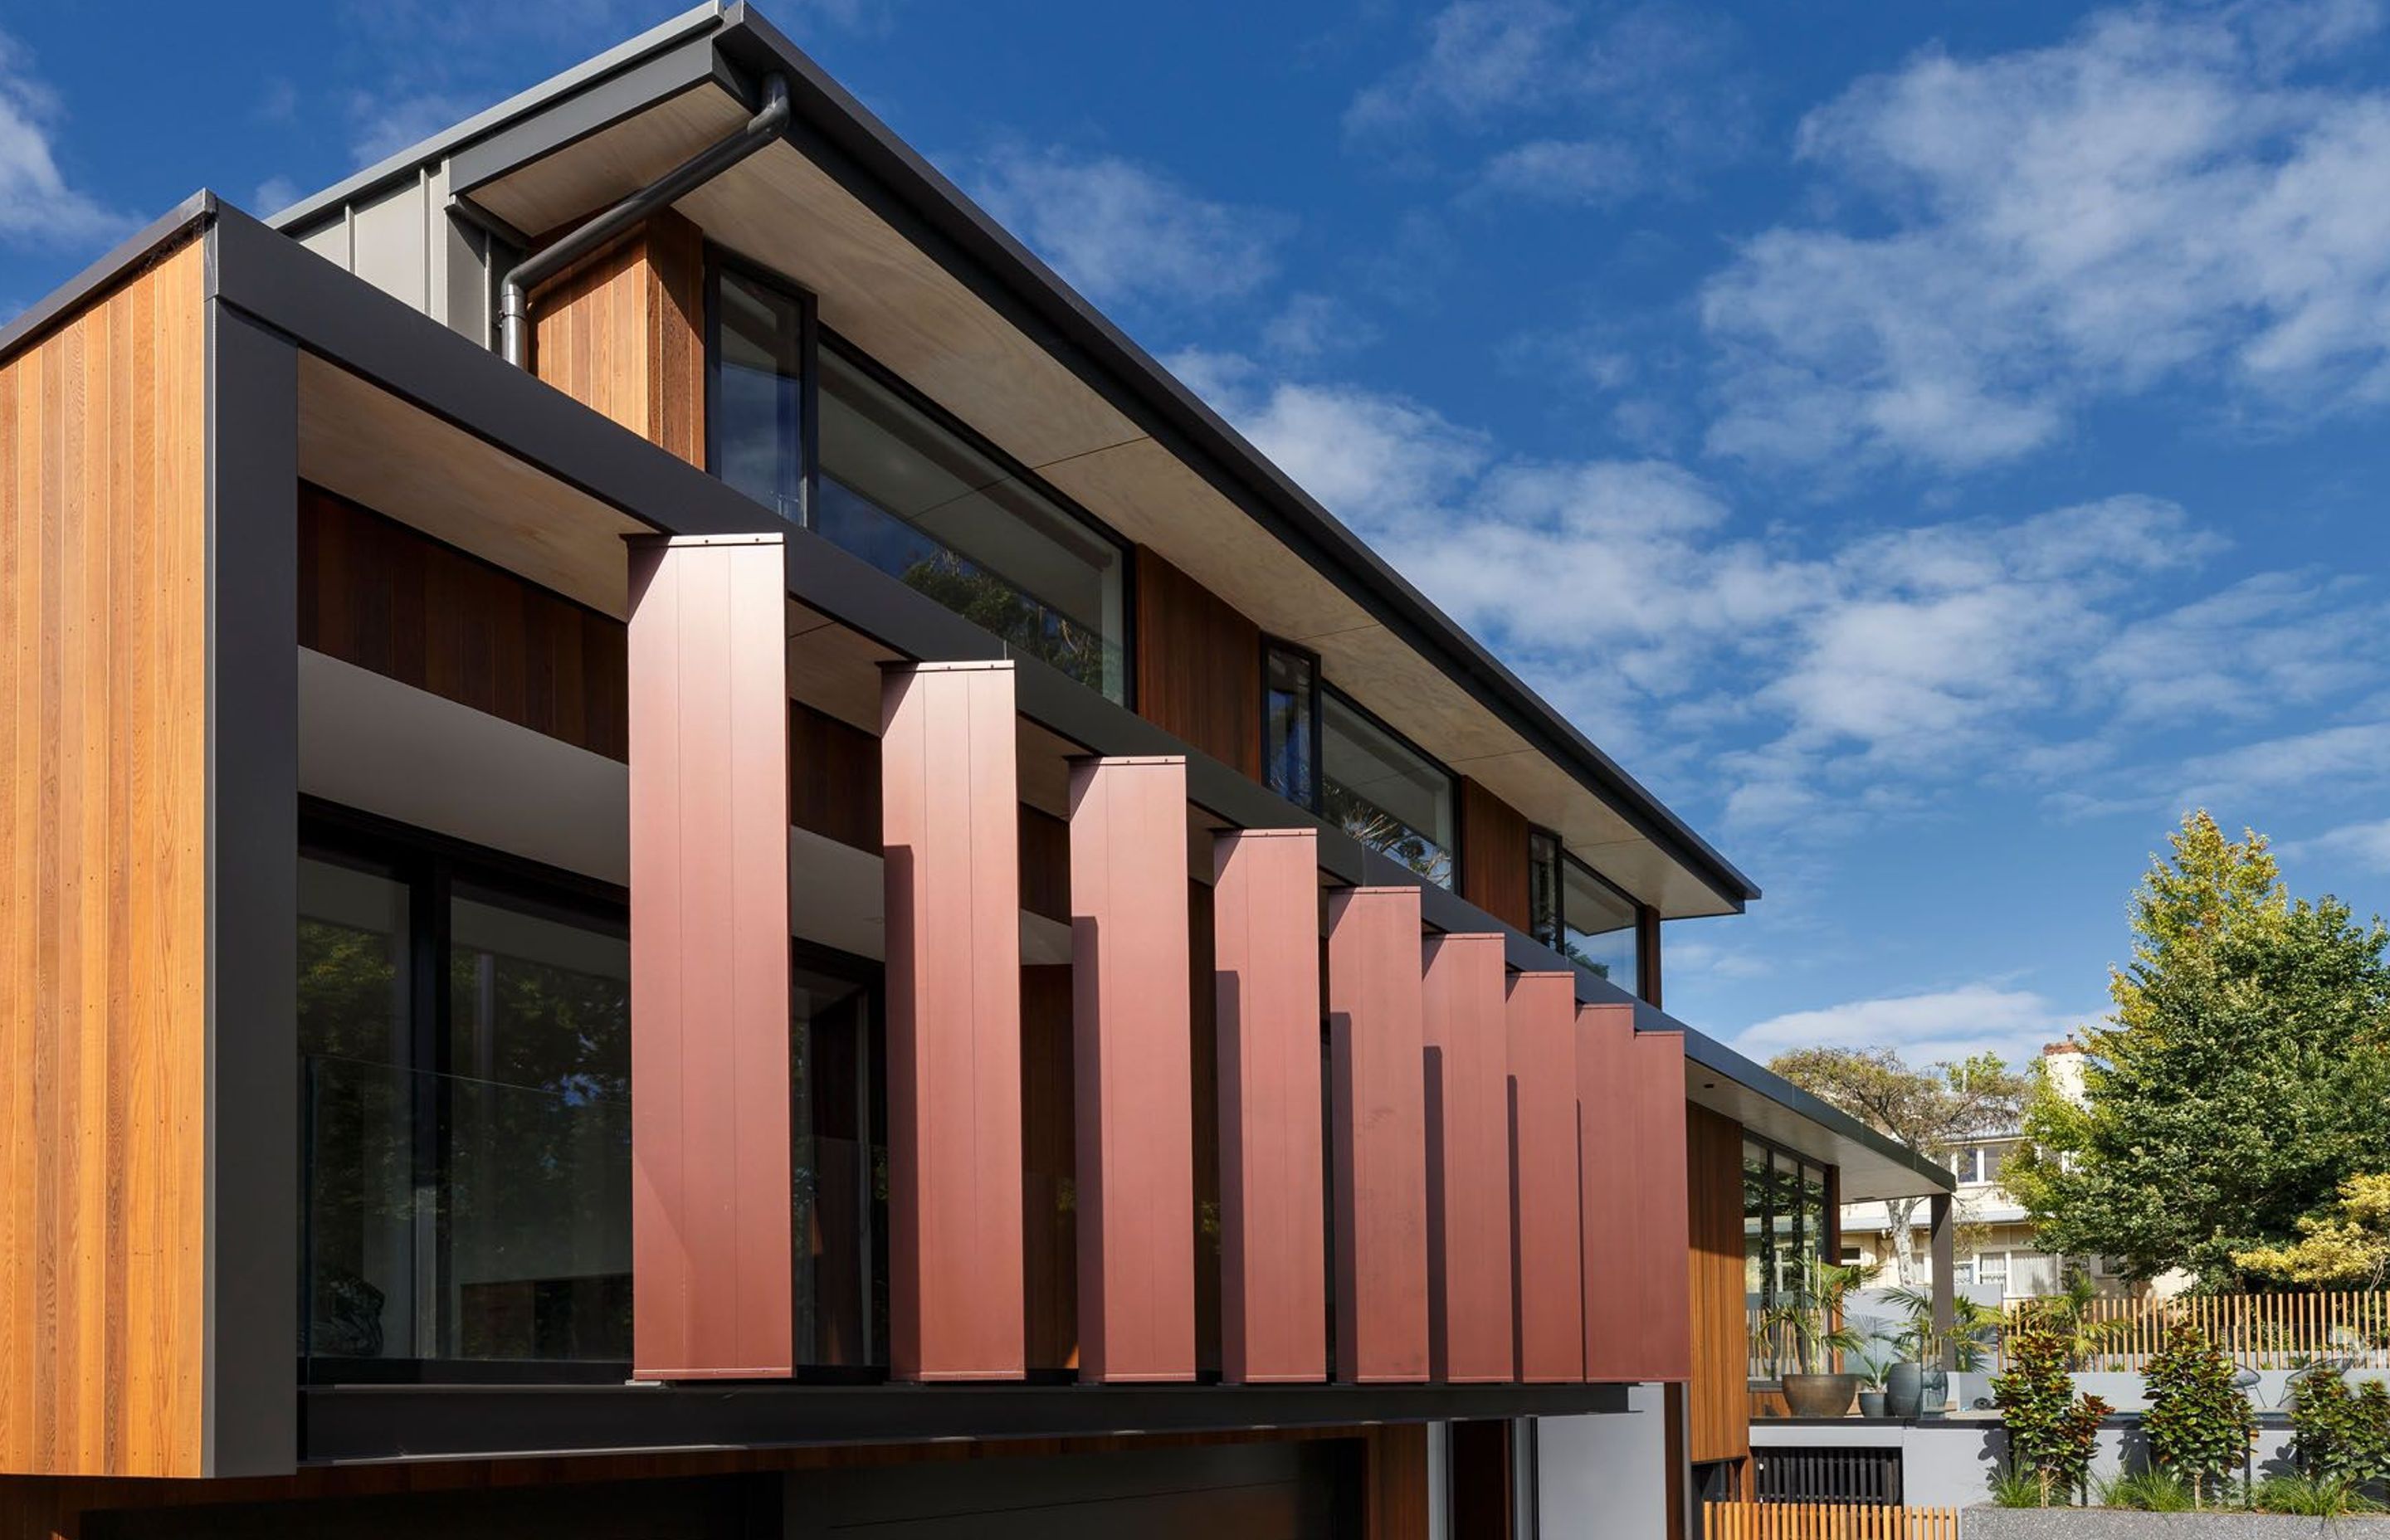 From the street, large vertical fins have been painted copper to complement the golden cedarscreen cladding.